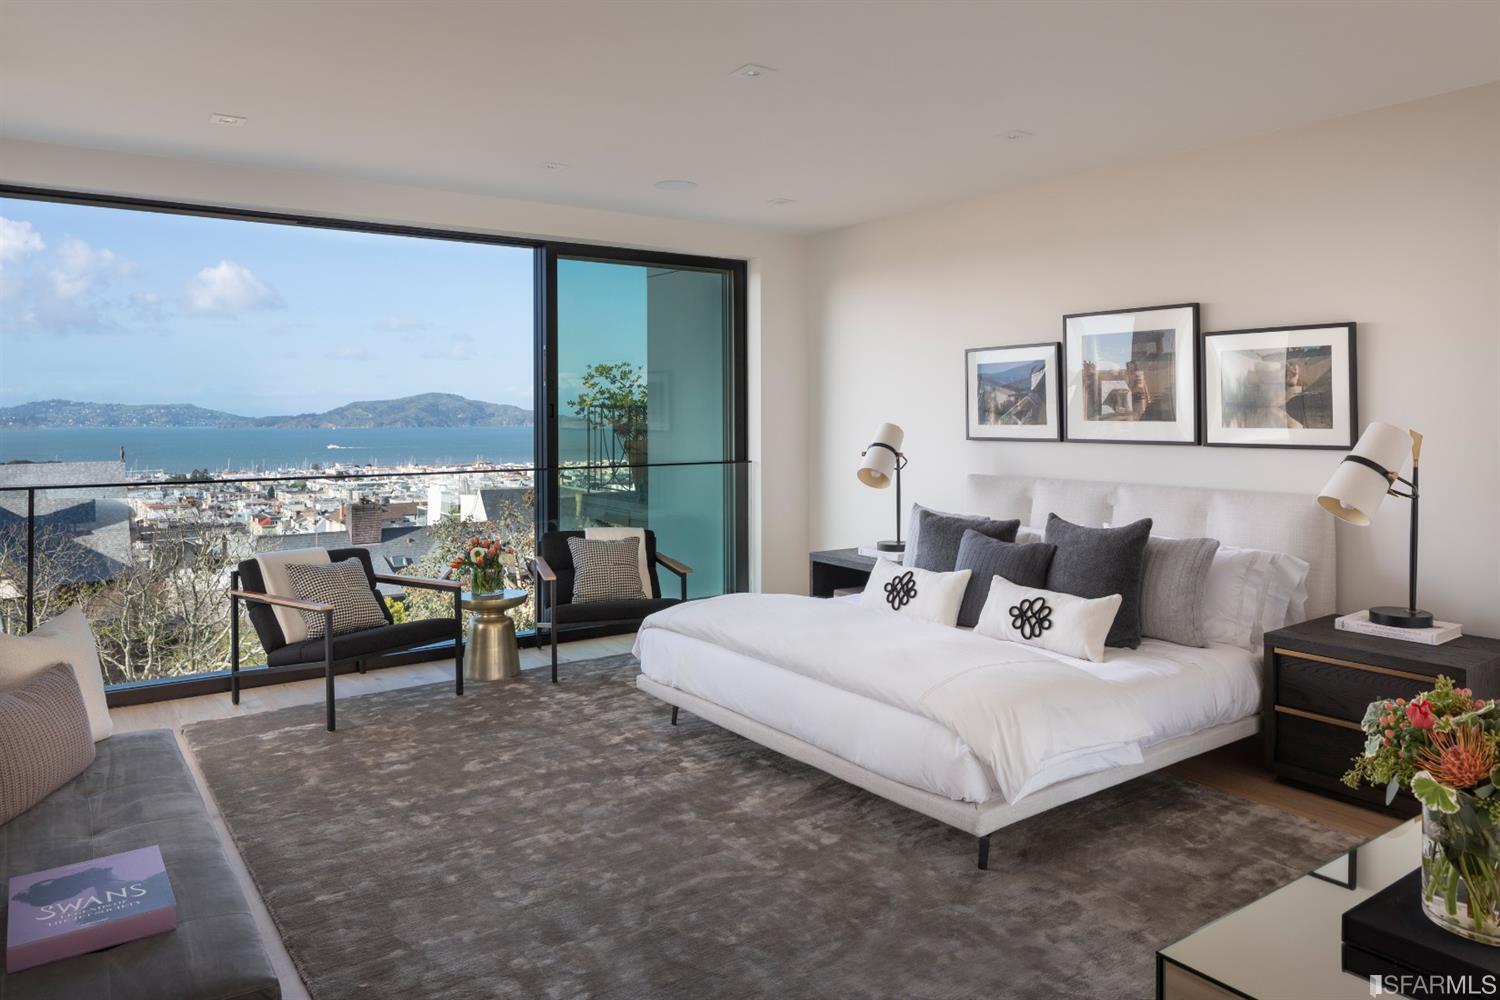 Master bedroom with plate glass window view of SF Bay